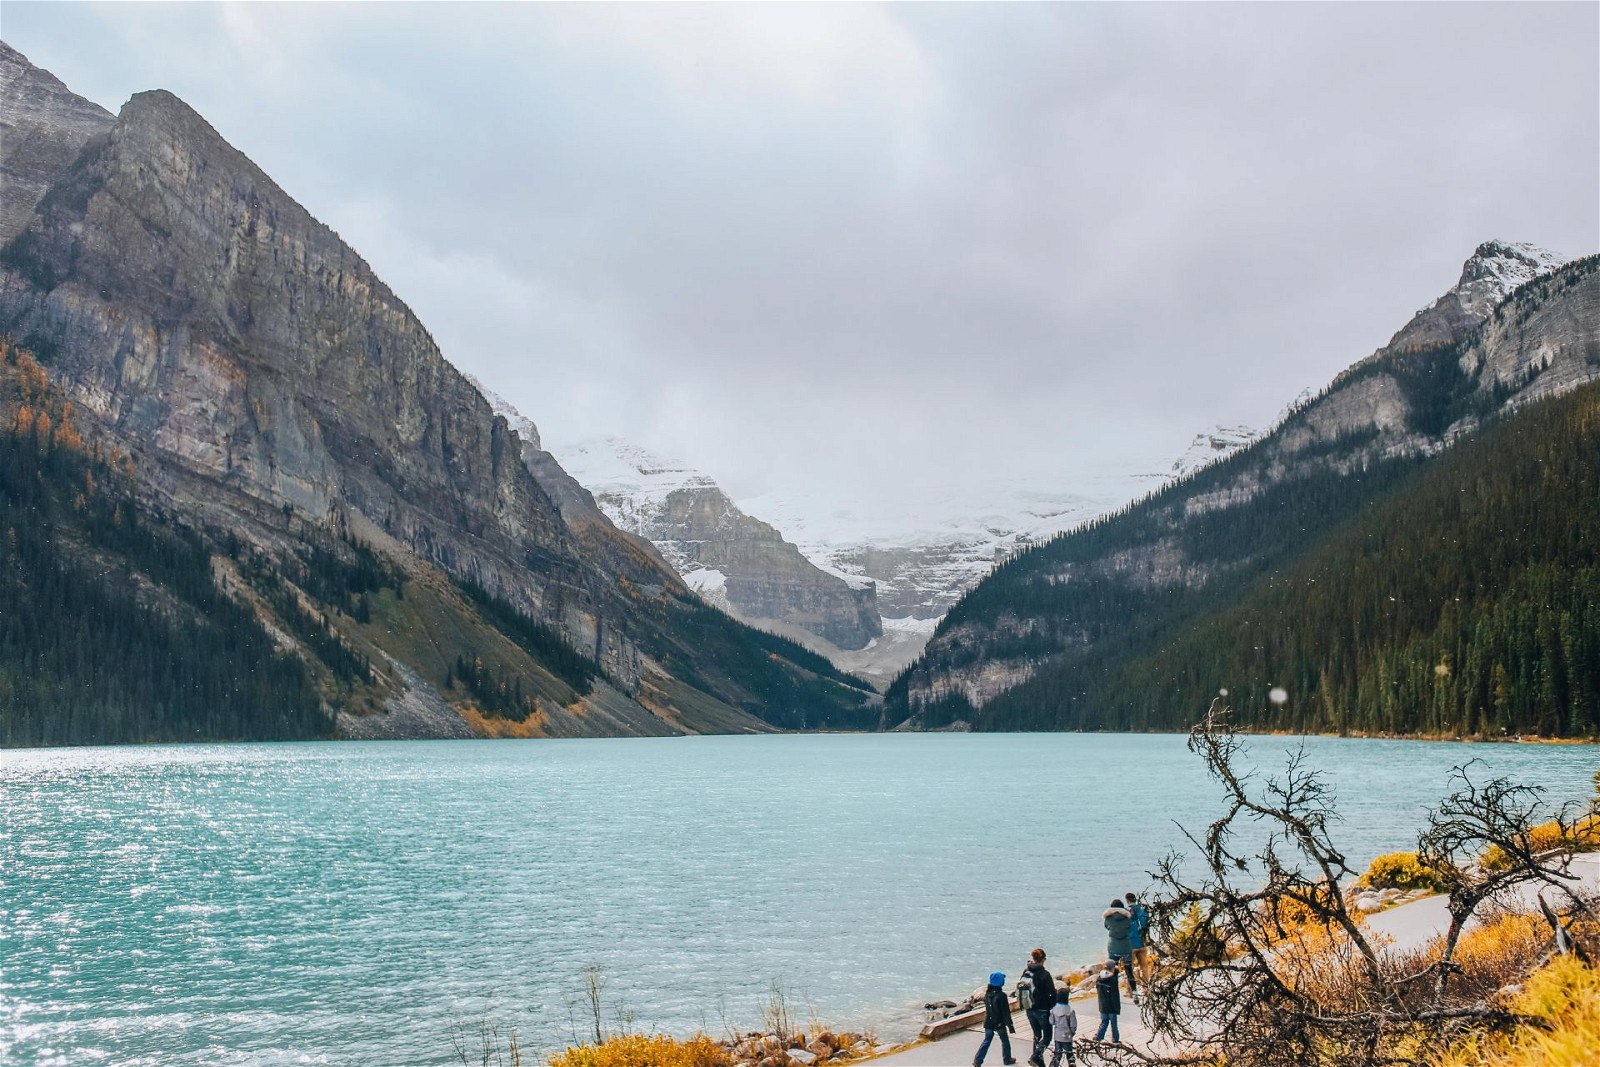 Lake Louise: Lake Louise is a glacial lake famous for its bright blue-green color and stunning views of the surrounding mountains. Visitors can hike around the l